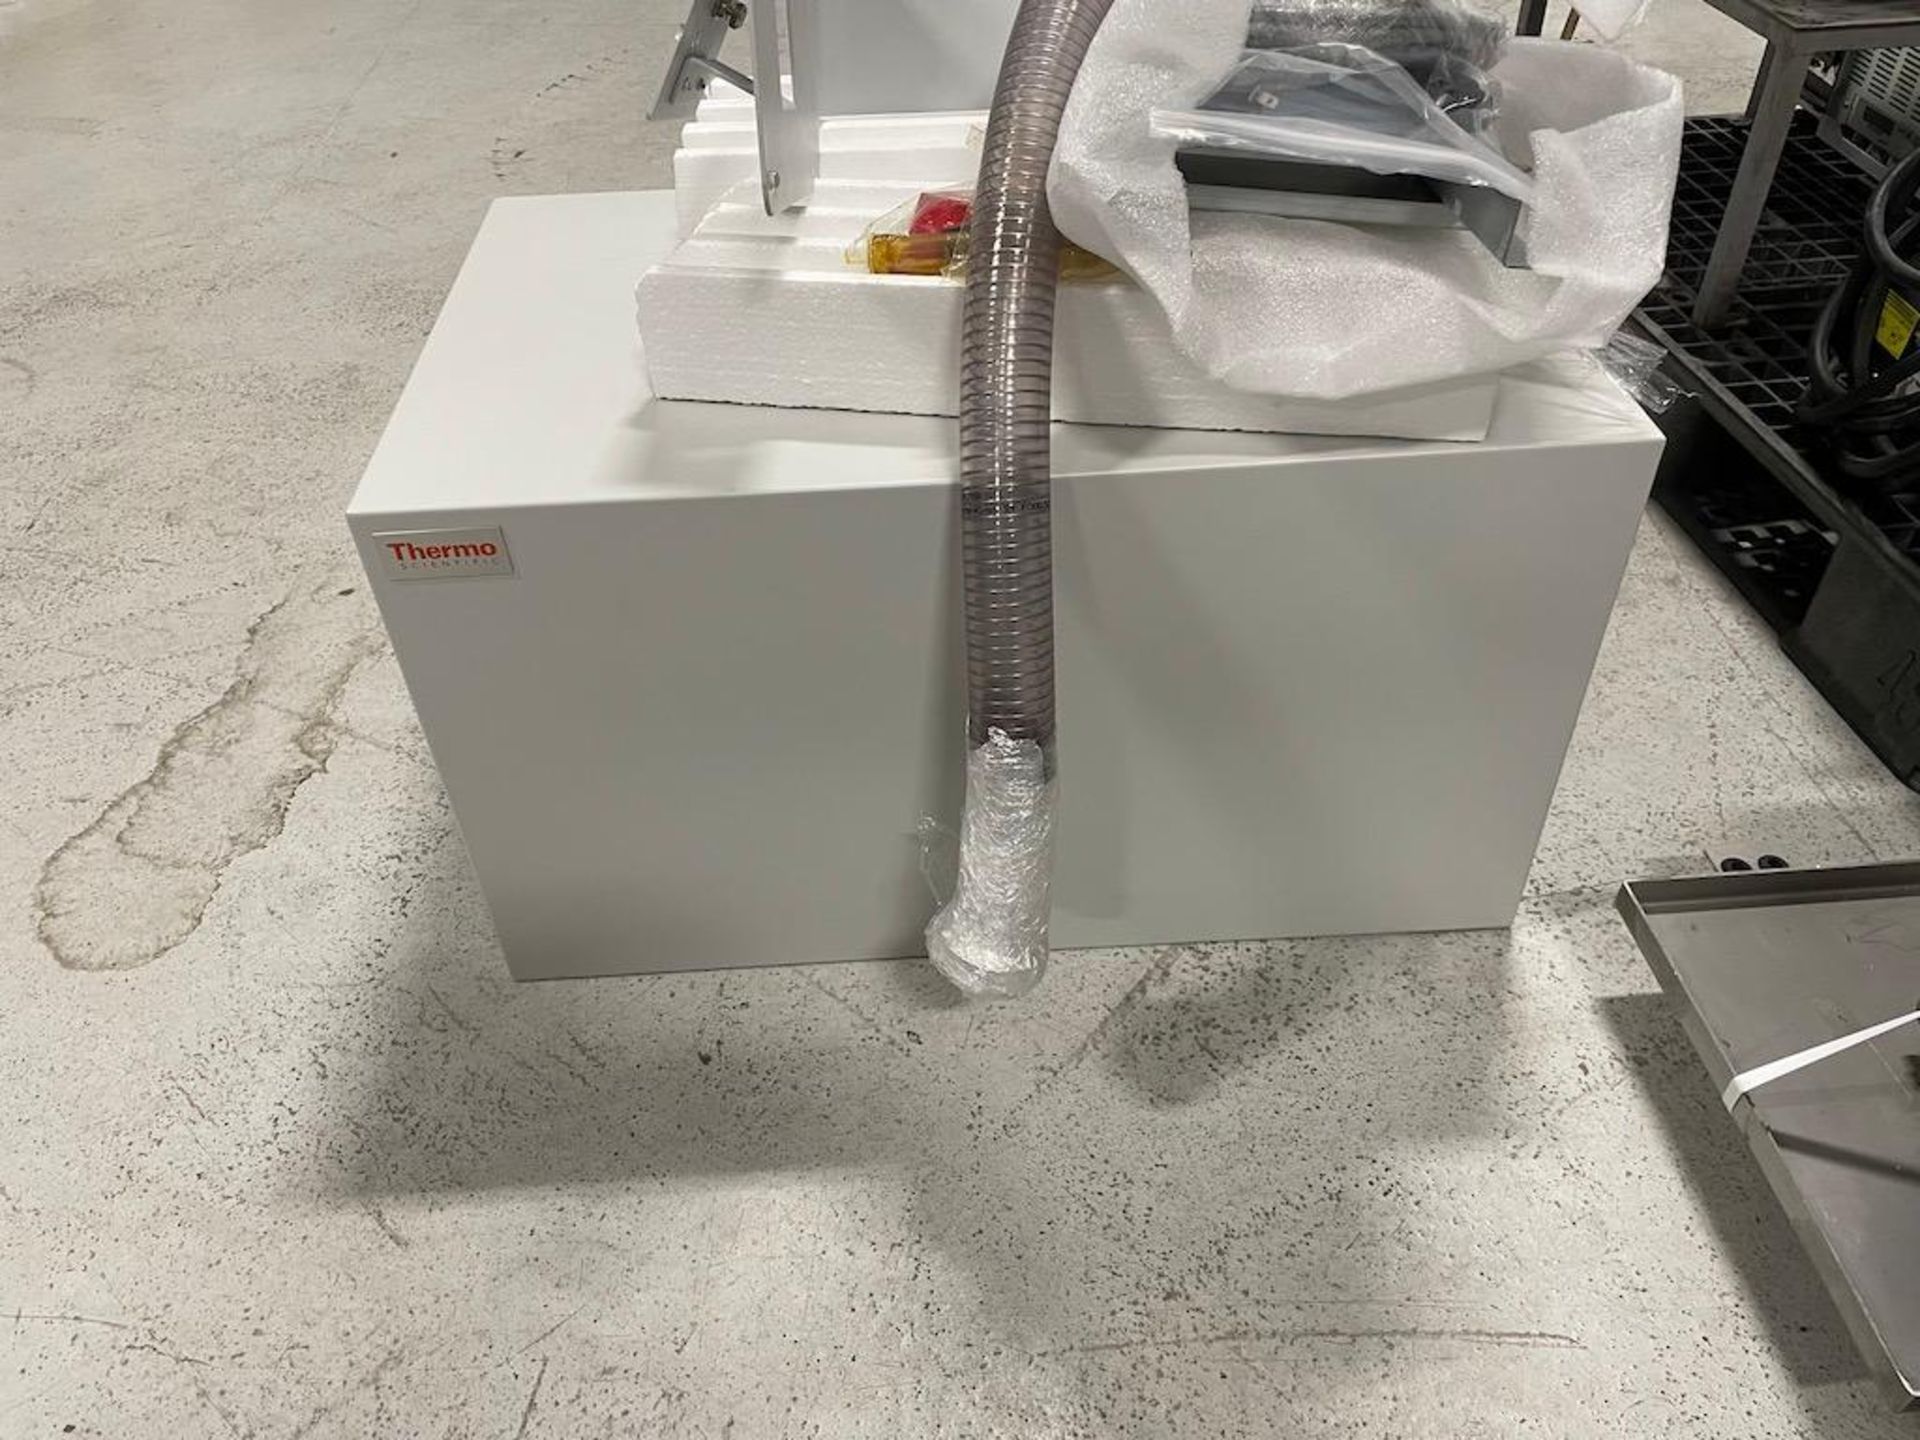 2017 THERMO SCIENTIFIC EXACTIVE SERIES MASS SPECTROMETER, MODEL Q EXACTIVE PLUS, SN 07354L, INCLUDES - Image 13 of 82